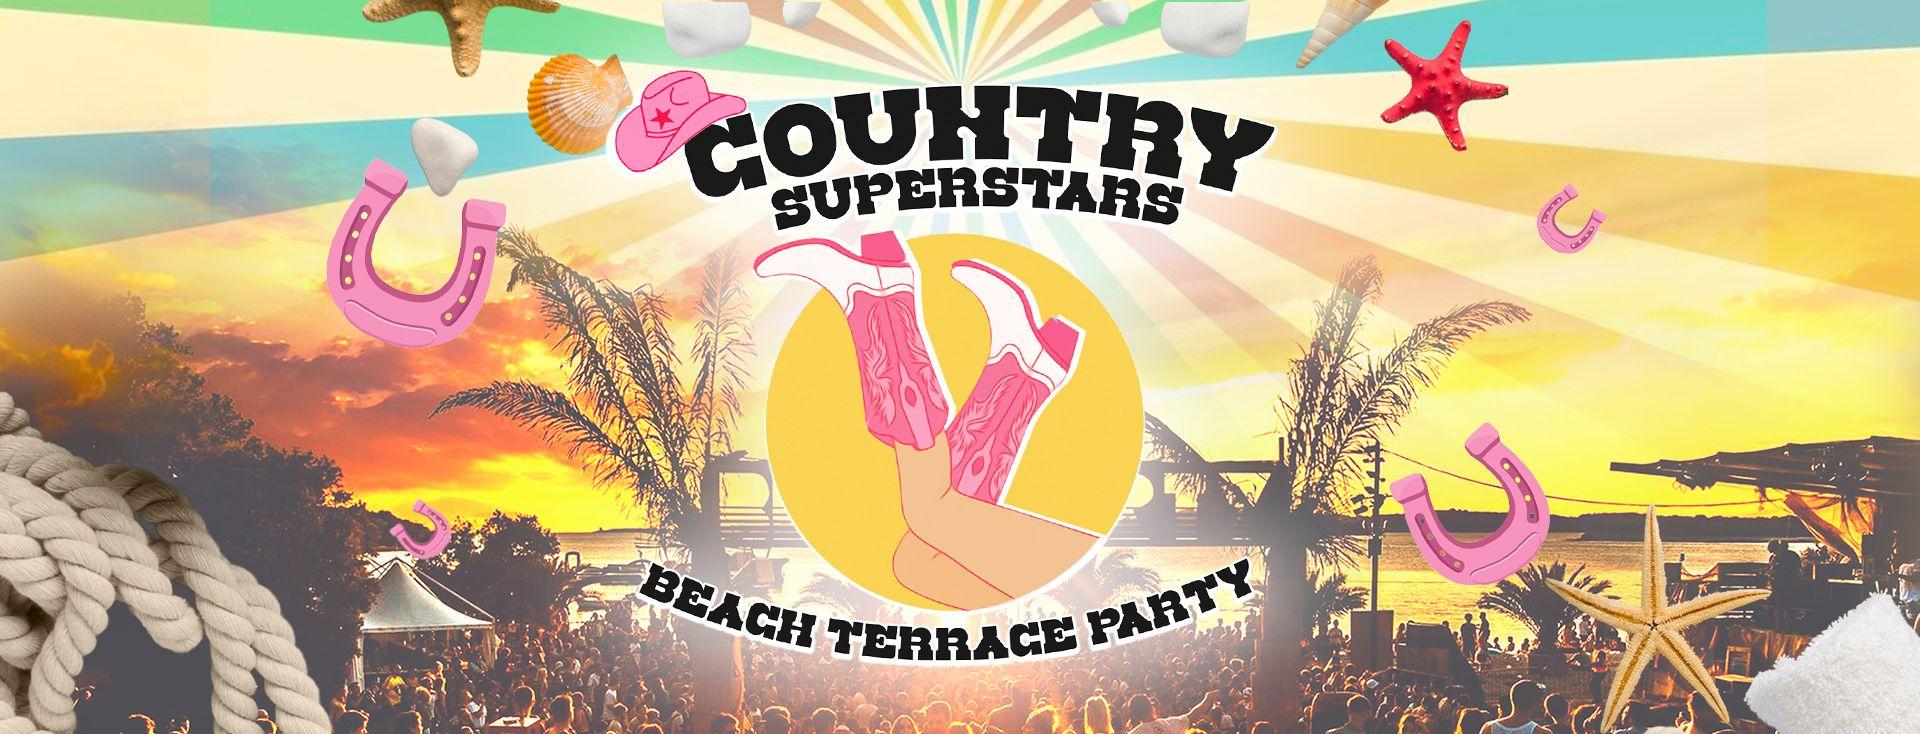 Country Superstars Beach Terrace Party - Brighton